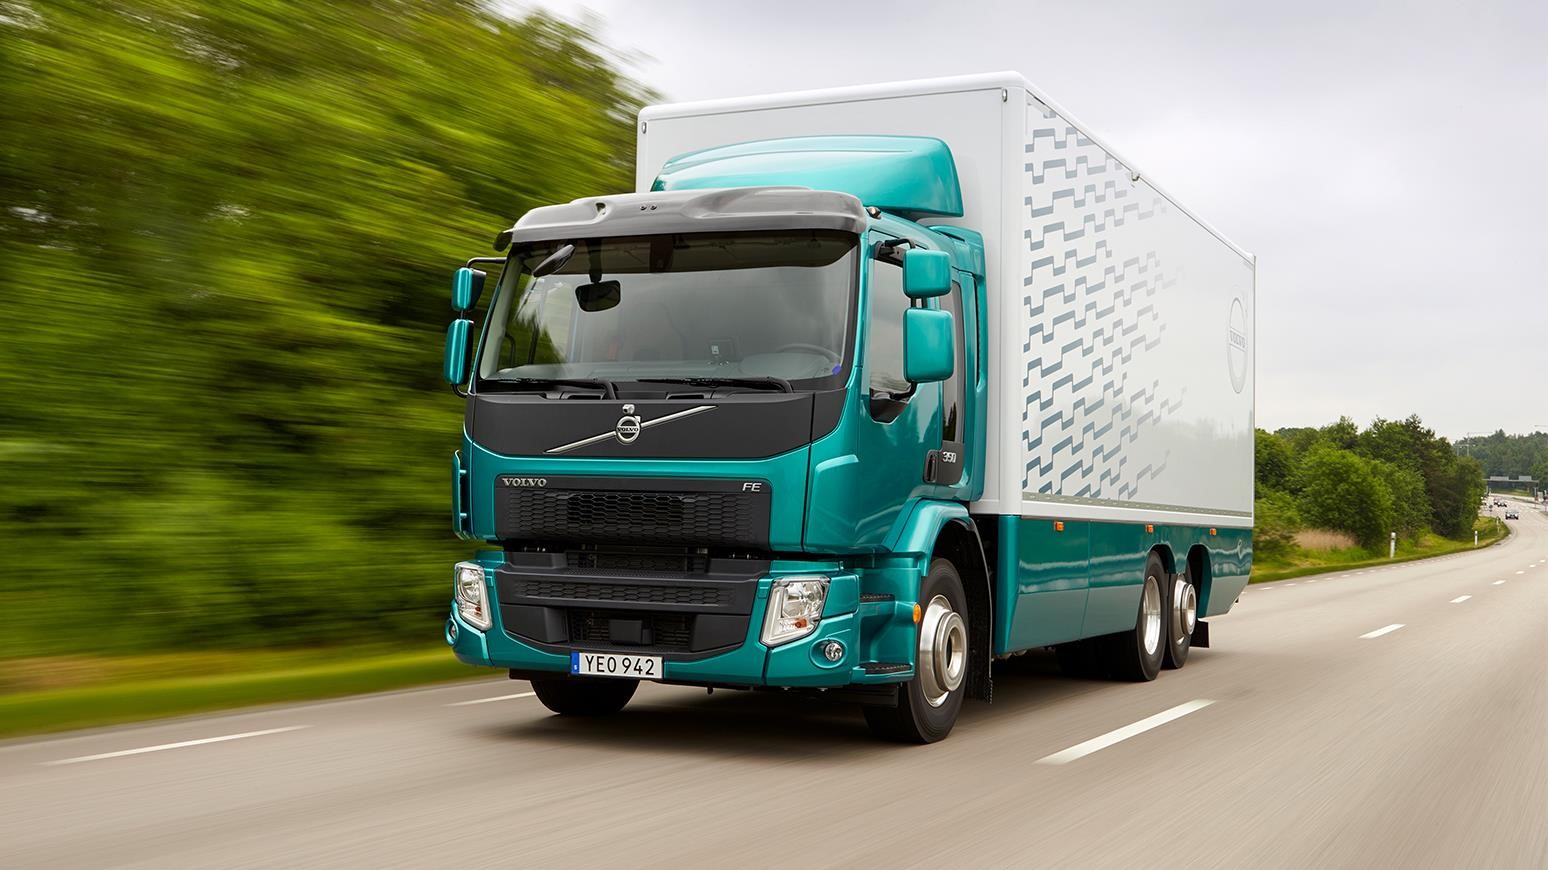 Versatility Is Key For The Volvo FE